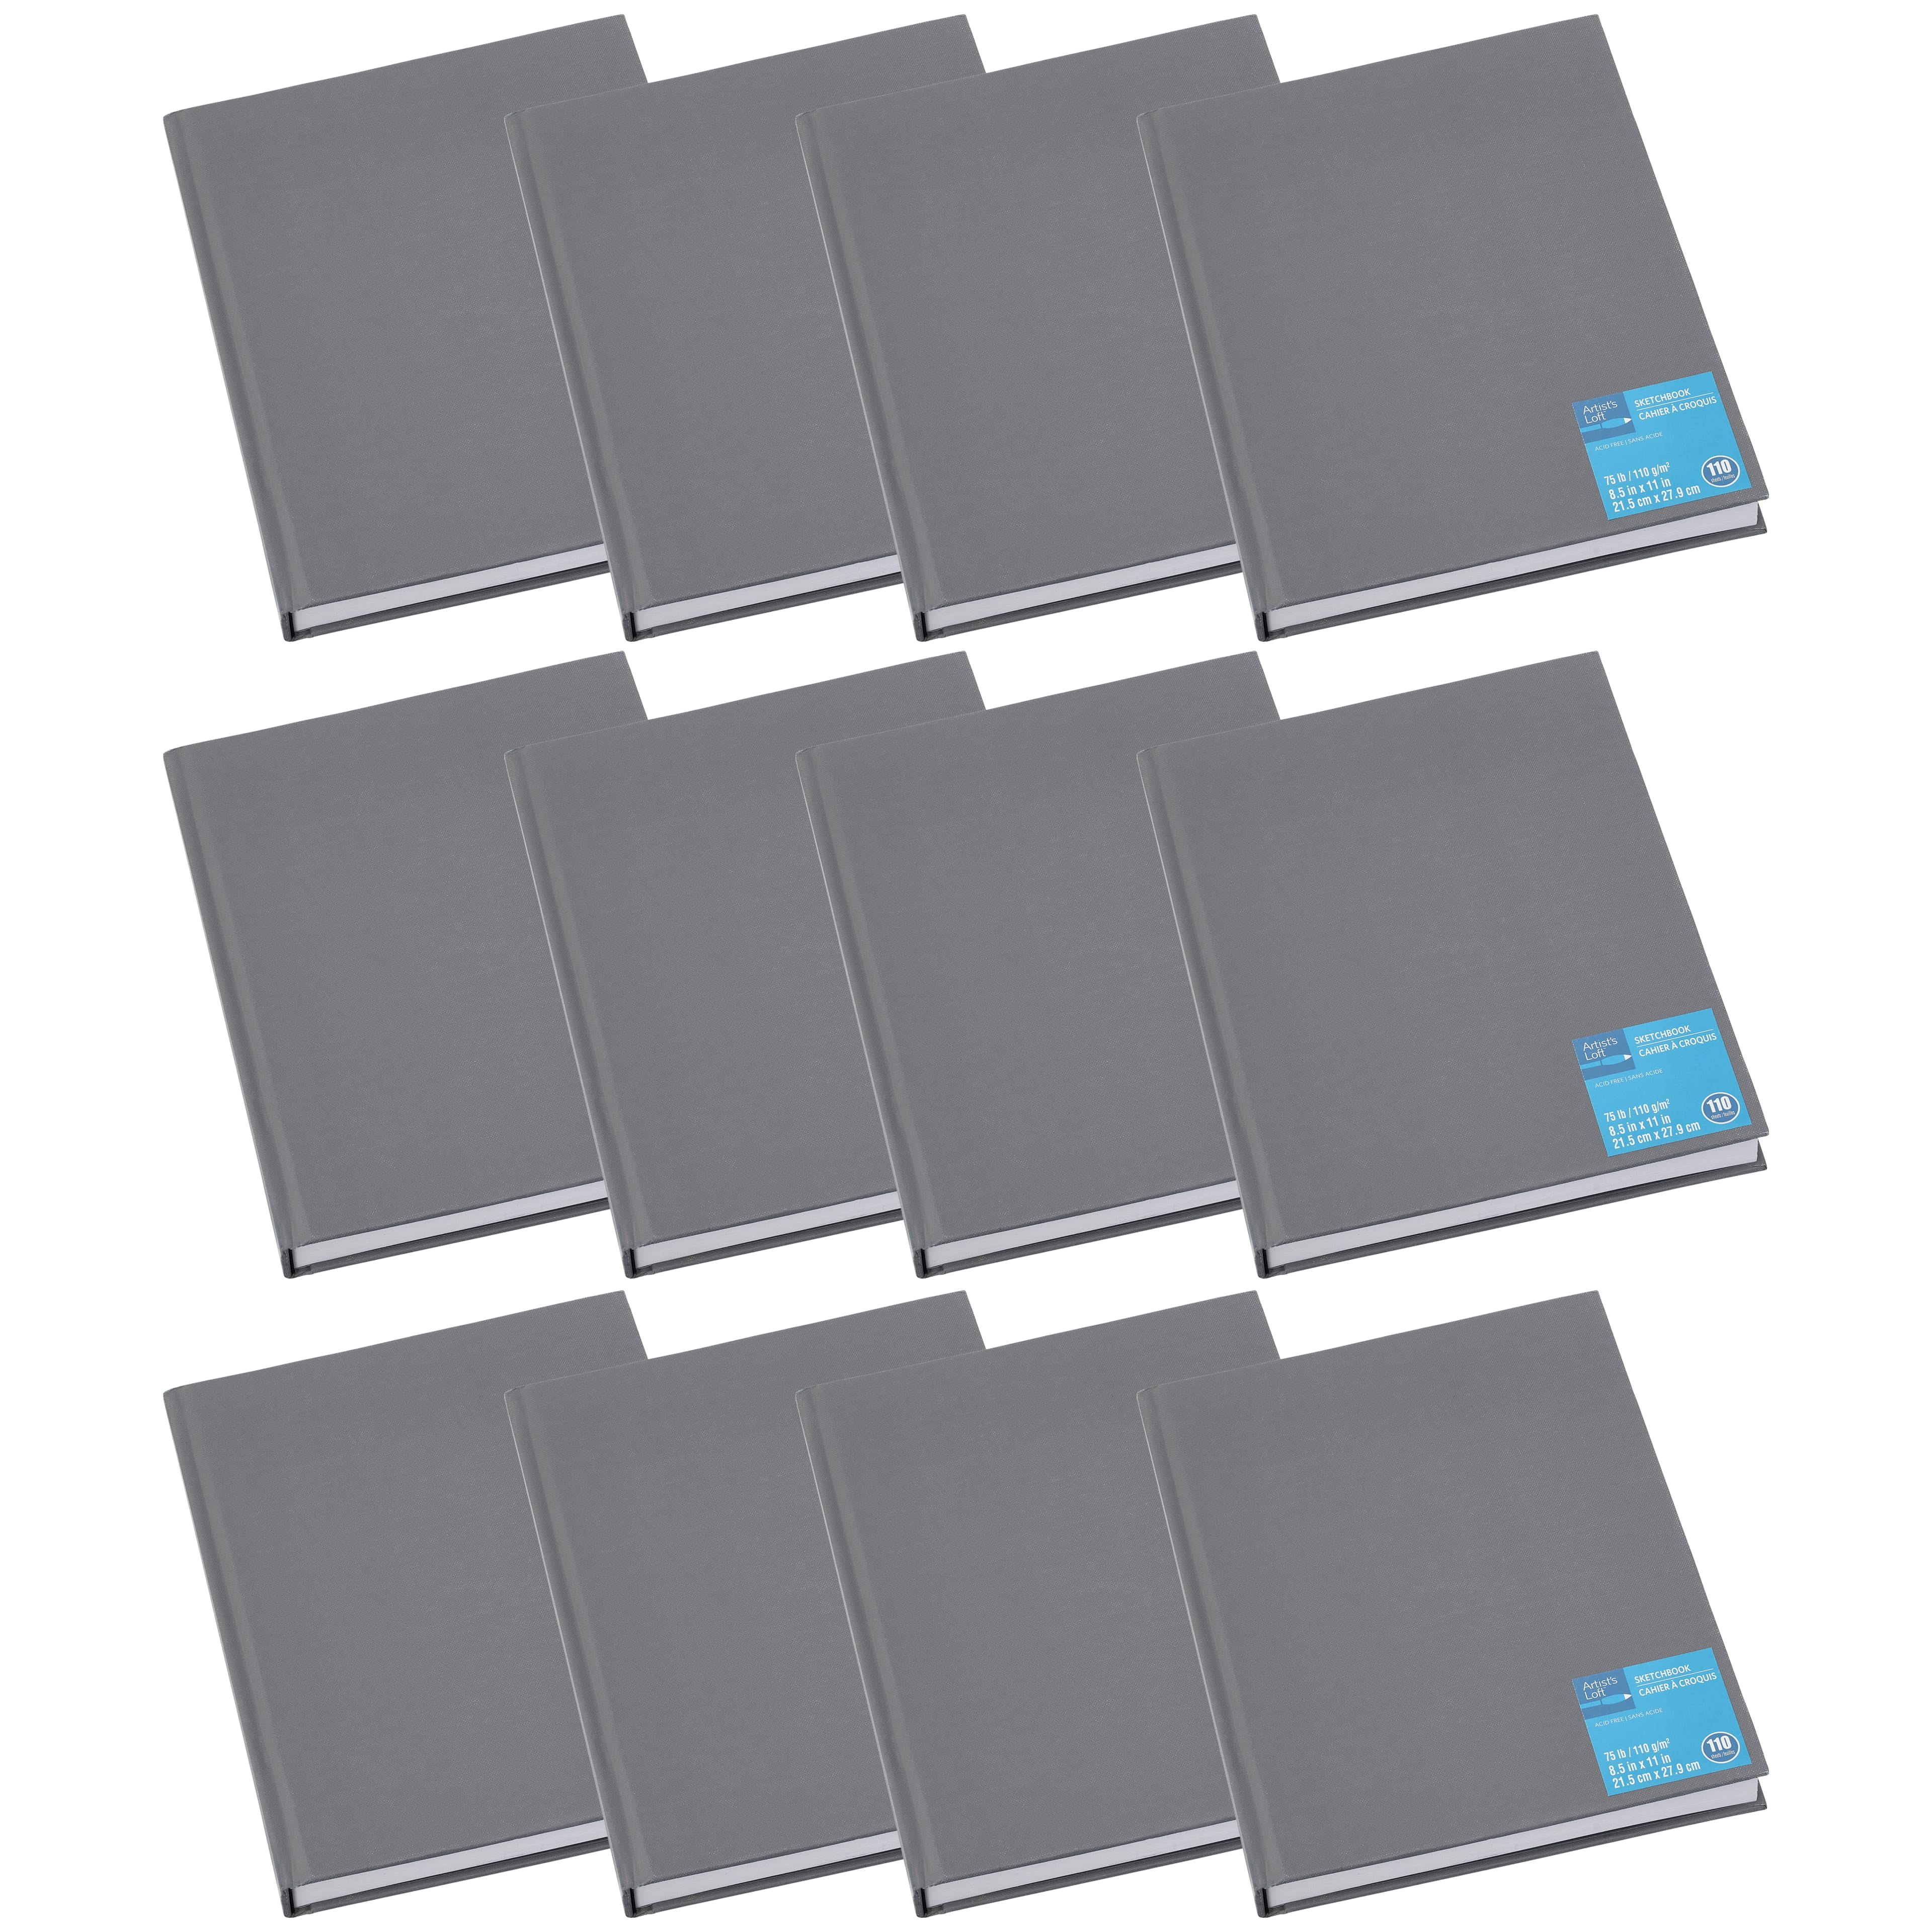 Gray Hardcover Sketchbook by Artist's Loft - Acid Free and Smudge Resistant  Paper, Sketch Pad for Drawing, Sketching, Writing - Bulk 12 Pack